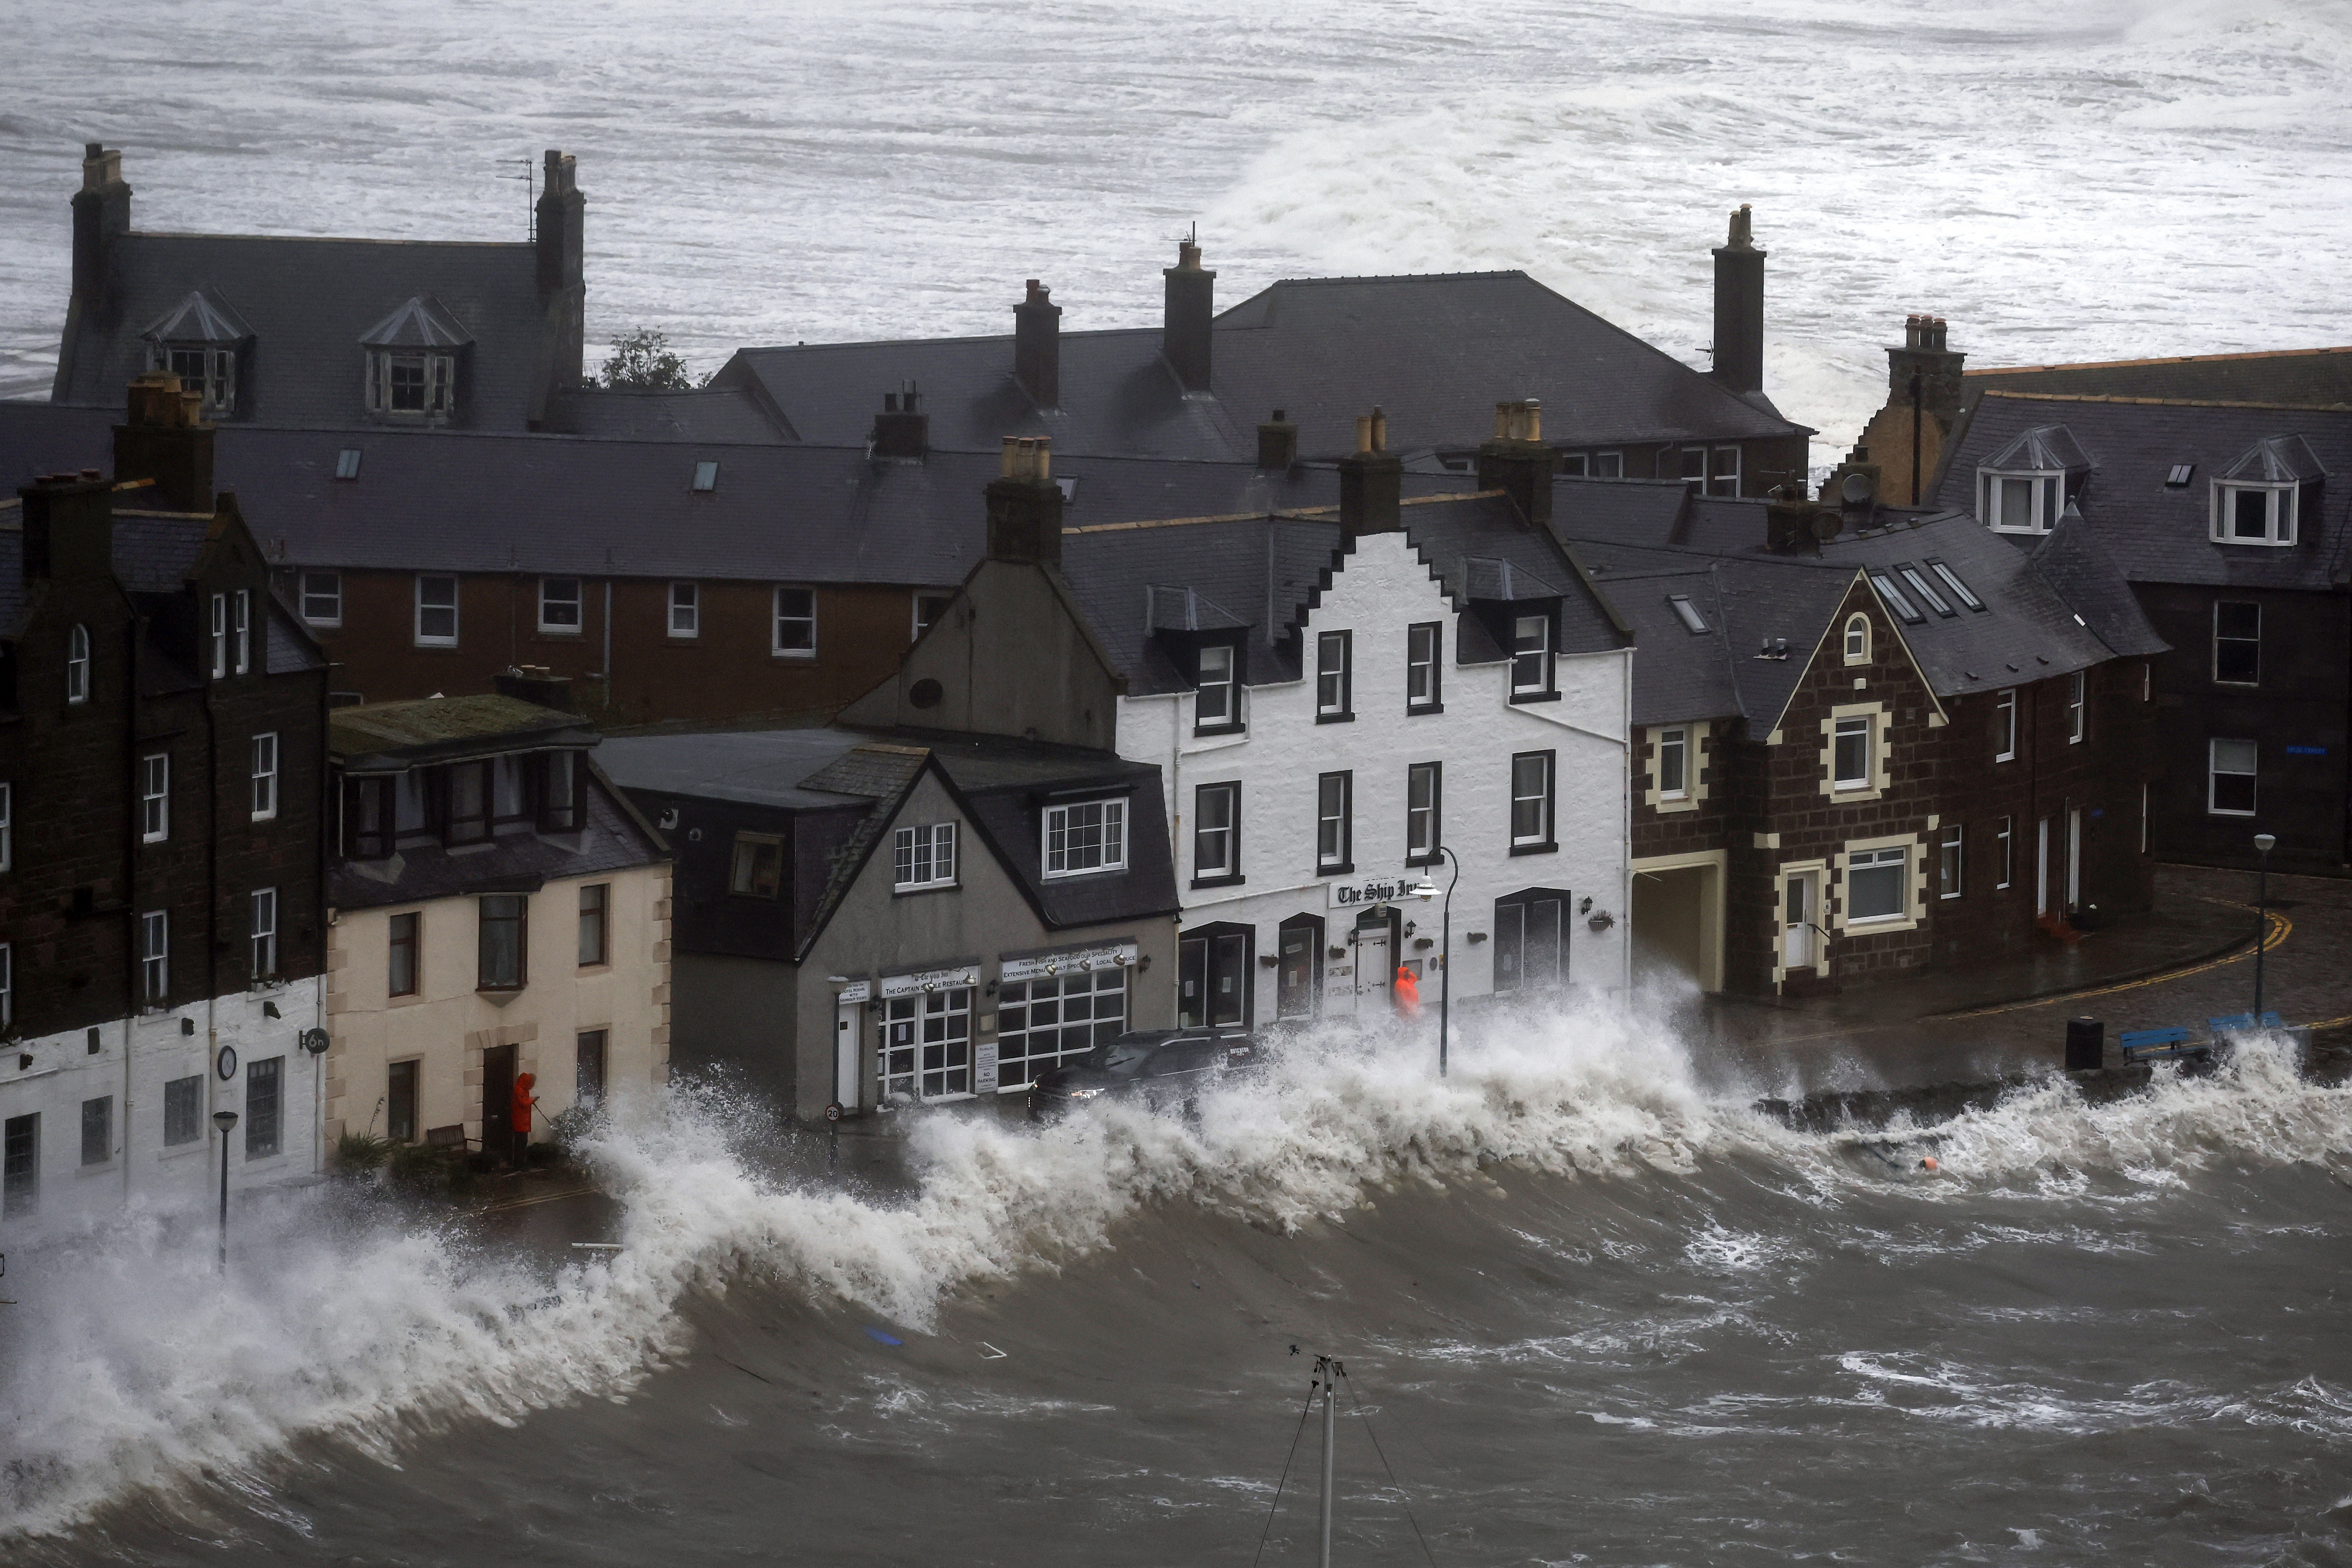 Waves crash over the harbour on October 19 in Stonehaven.